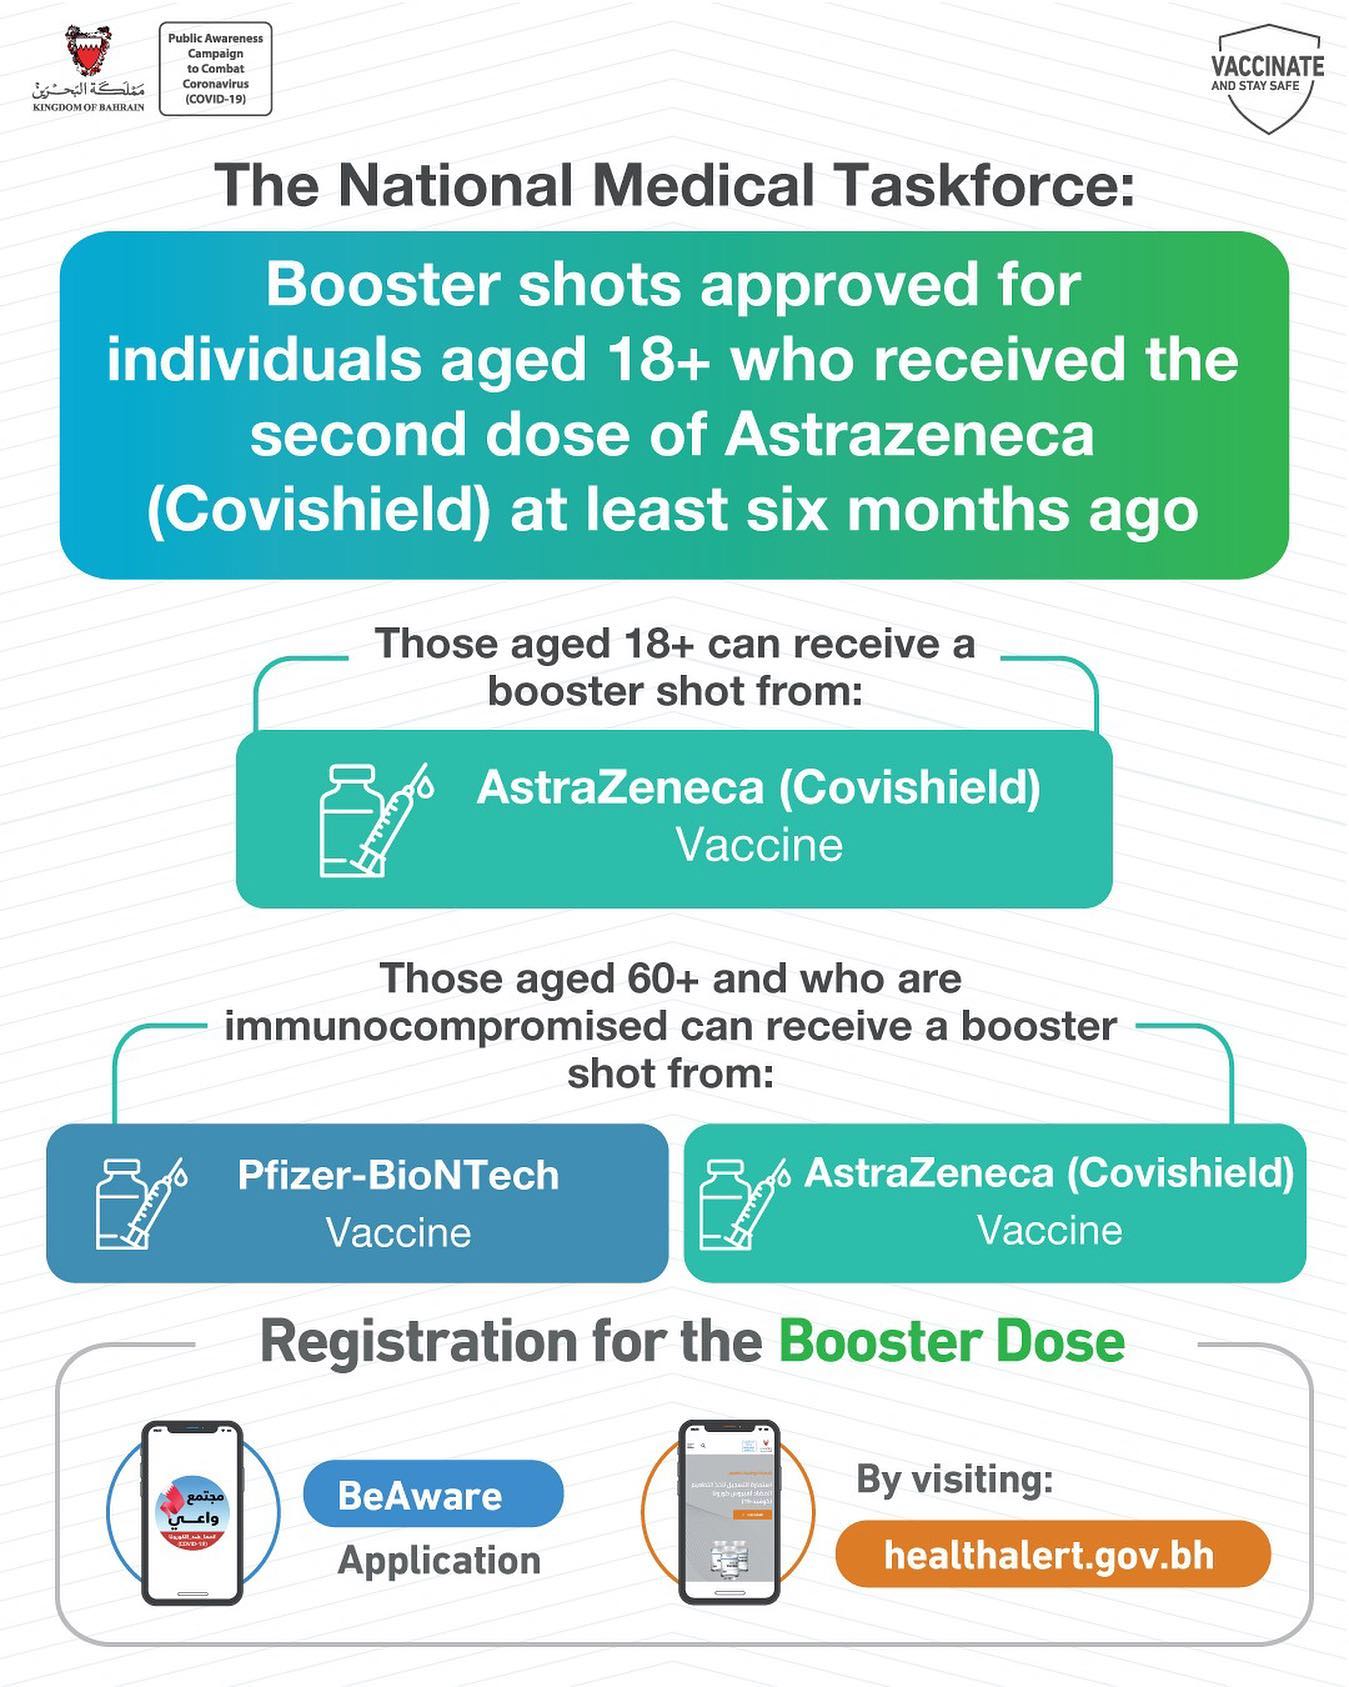 Booster shots approved for those 18+ who were vaccinated with second dose of Astrazeneca (Covishield) at least six months ago